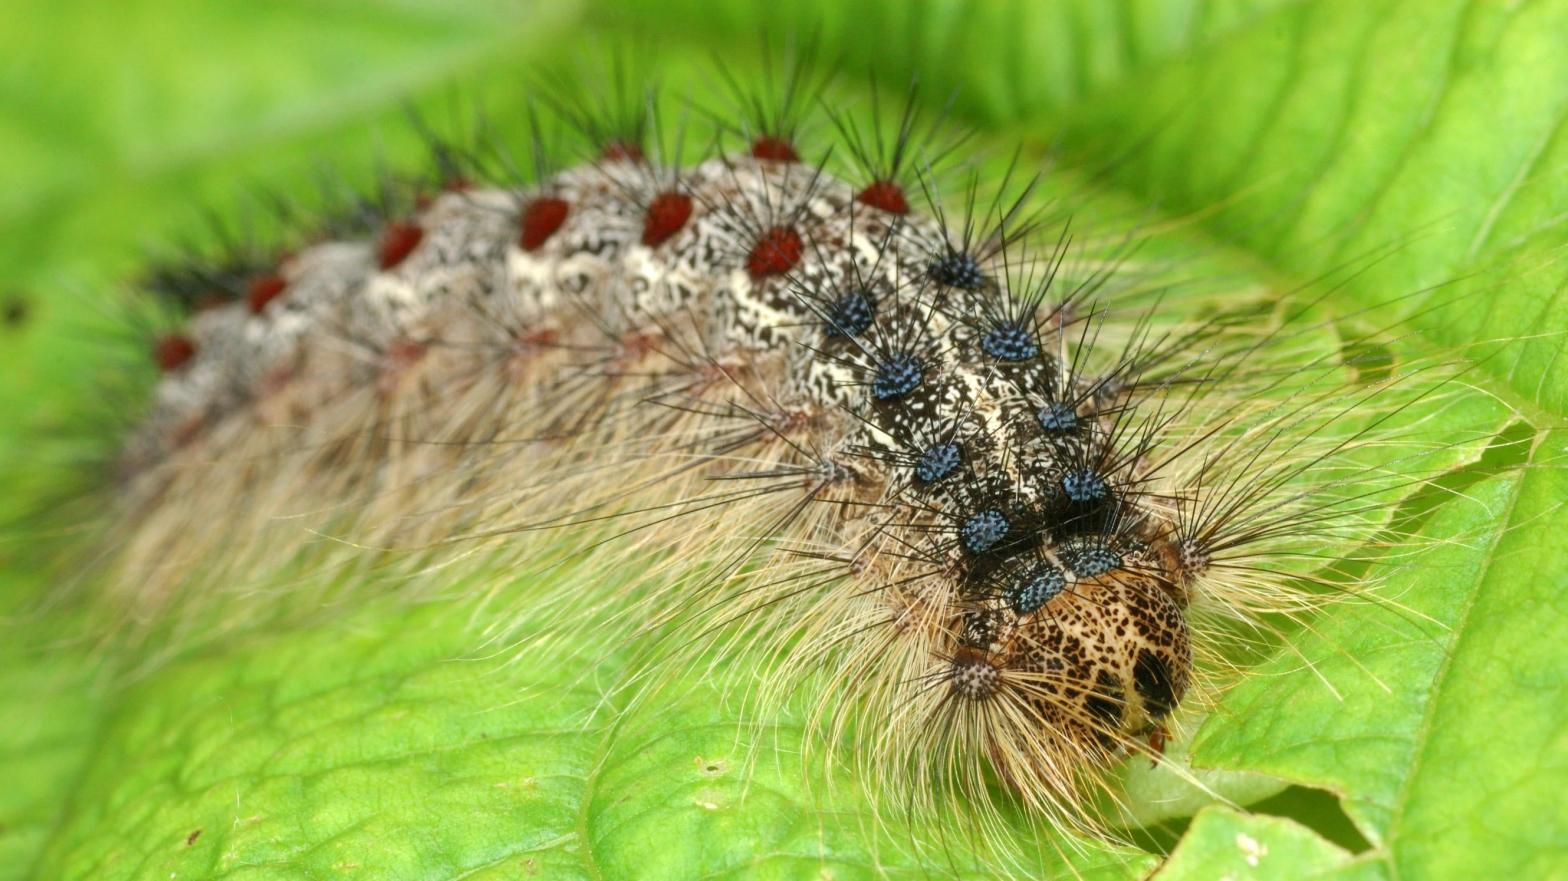 The spongy moth (Lymantria dispar) in its caterpillar stage of life. (Photo: Shutterstock, Shutterstock)